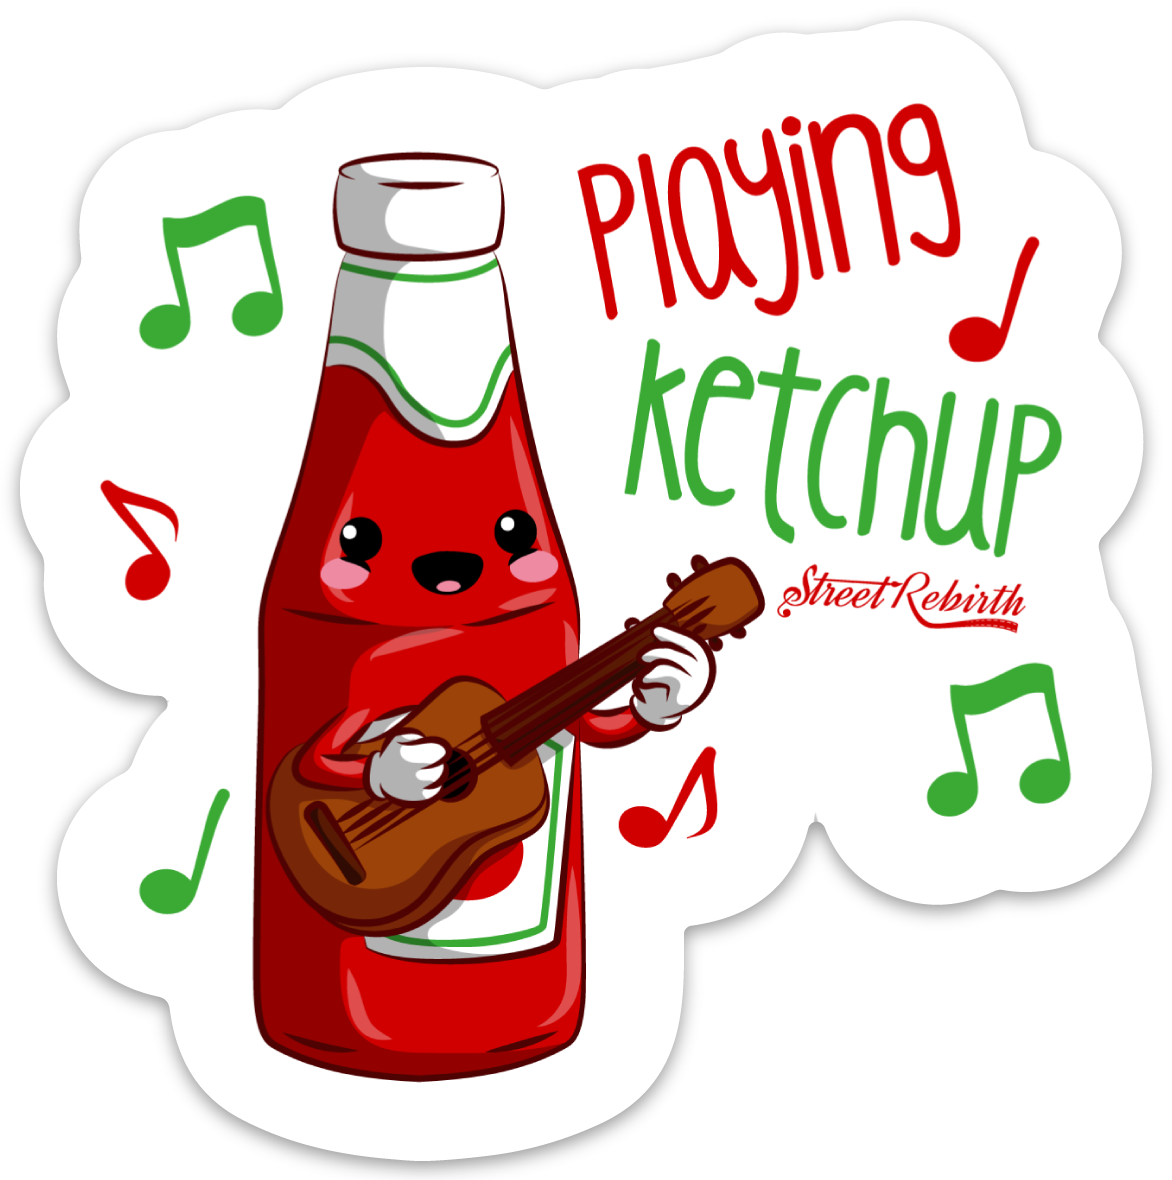 Playing Ketchup PUN STICKER – ONE 4 INCH WATER PROOF VINYL STICKER – FOR HYDRO FLASK, SKATEBOARD, LAPTOP, PLANNER, CAR, COLLECTING, GIFTING